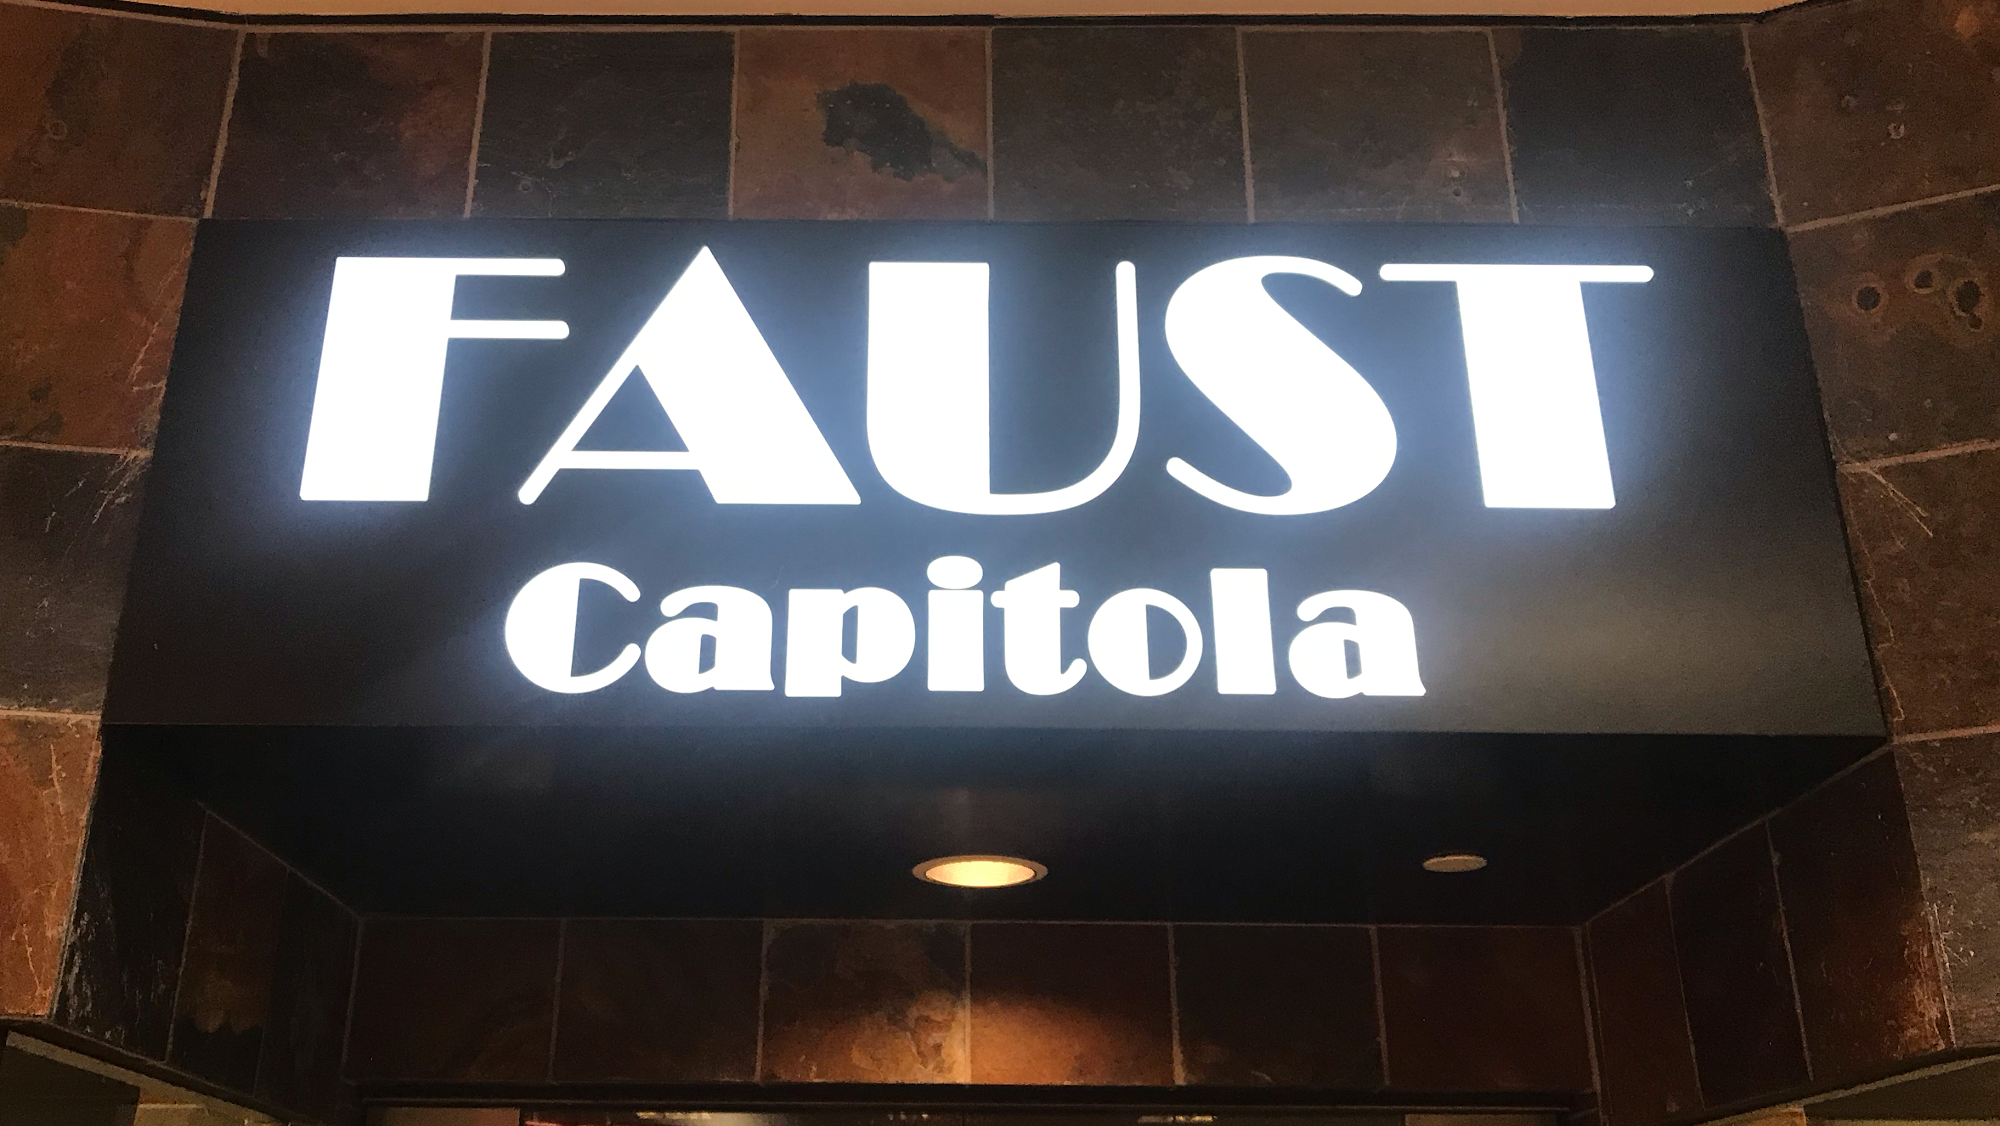 Faust Capitola